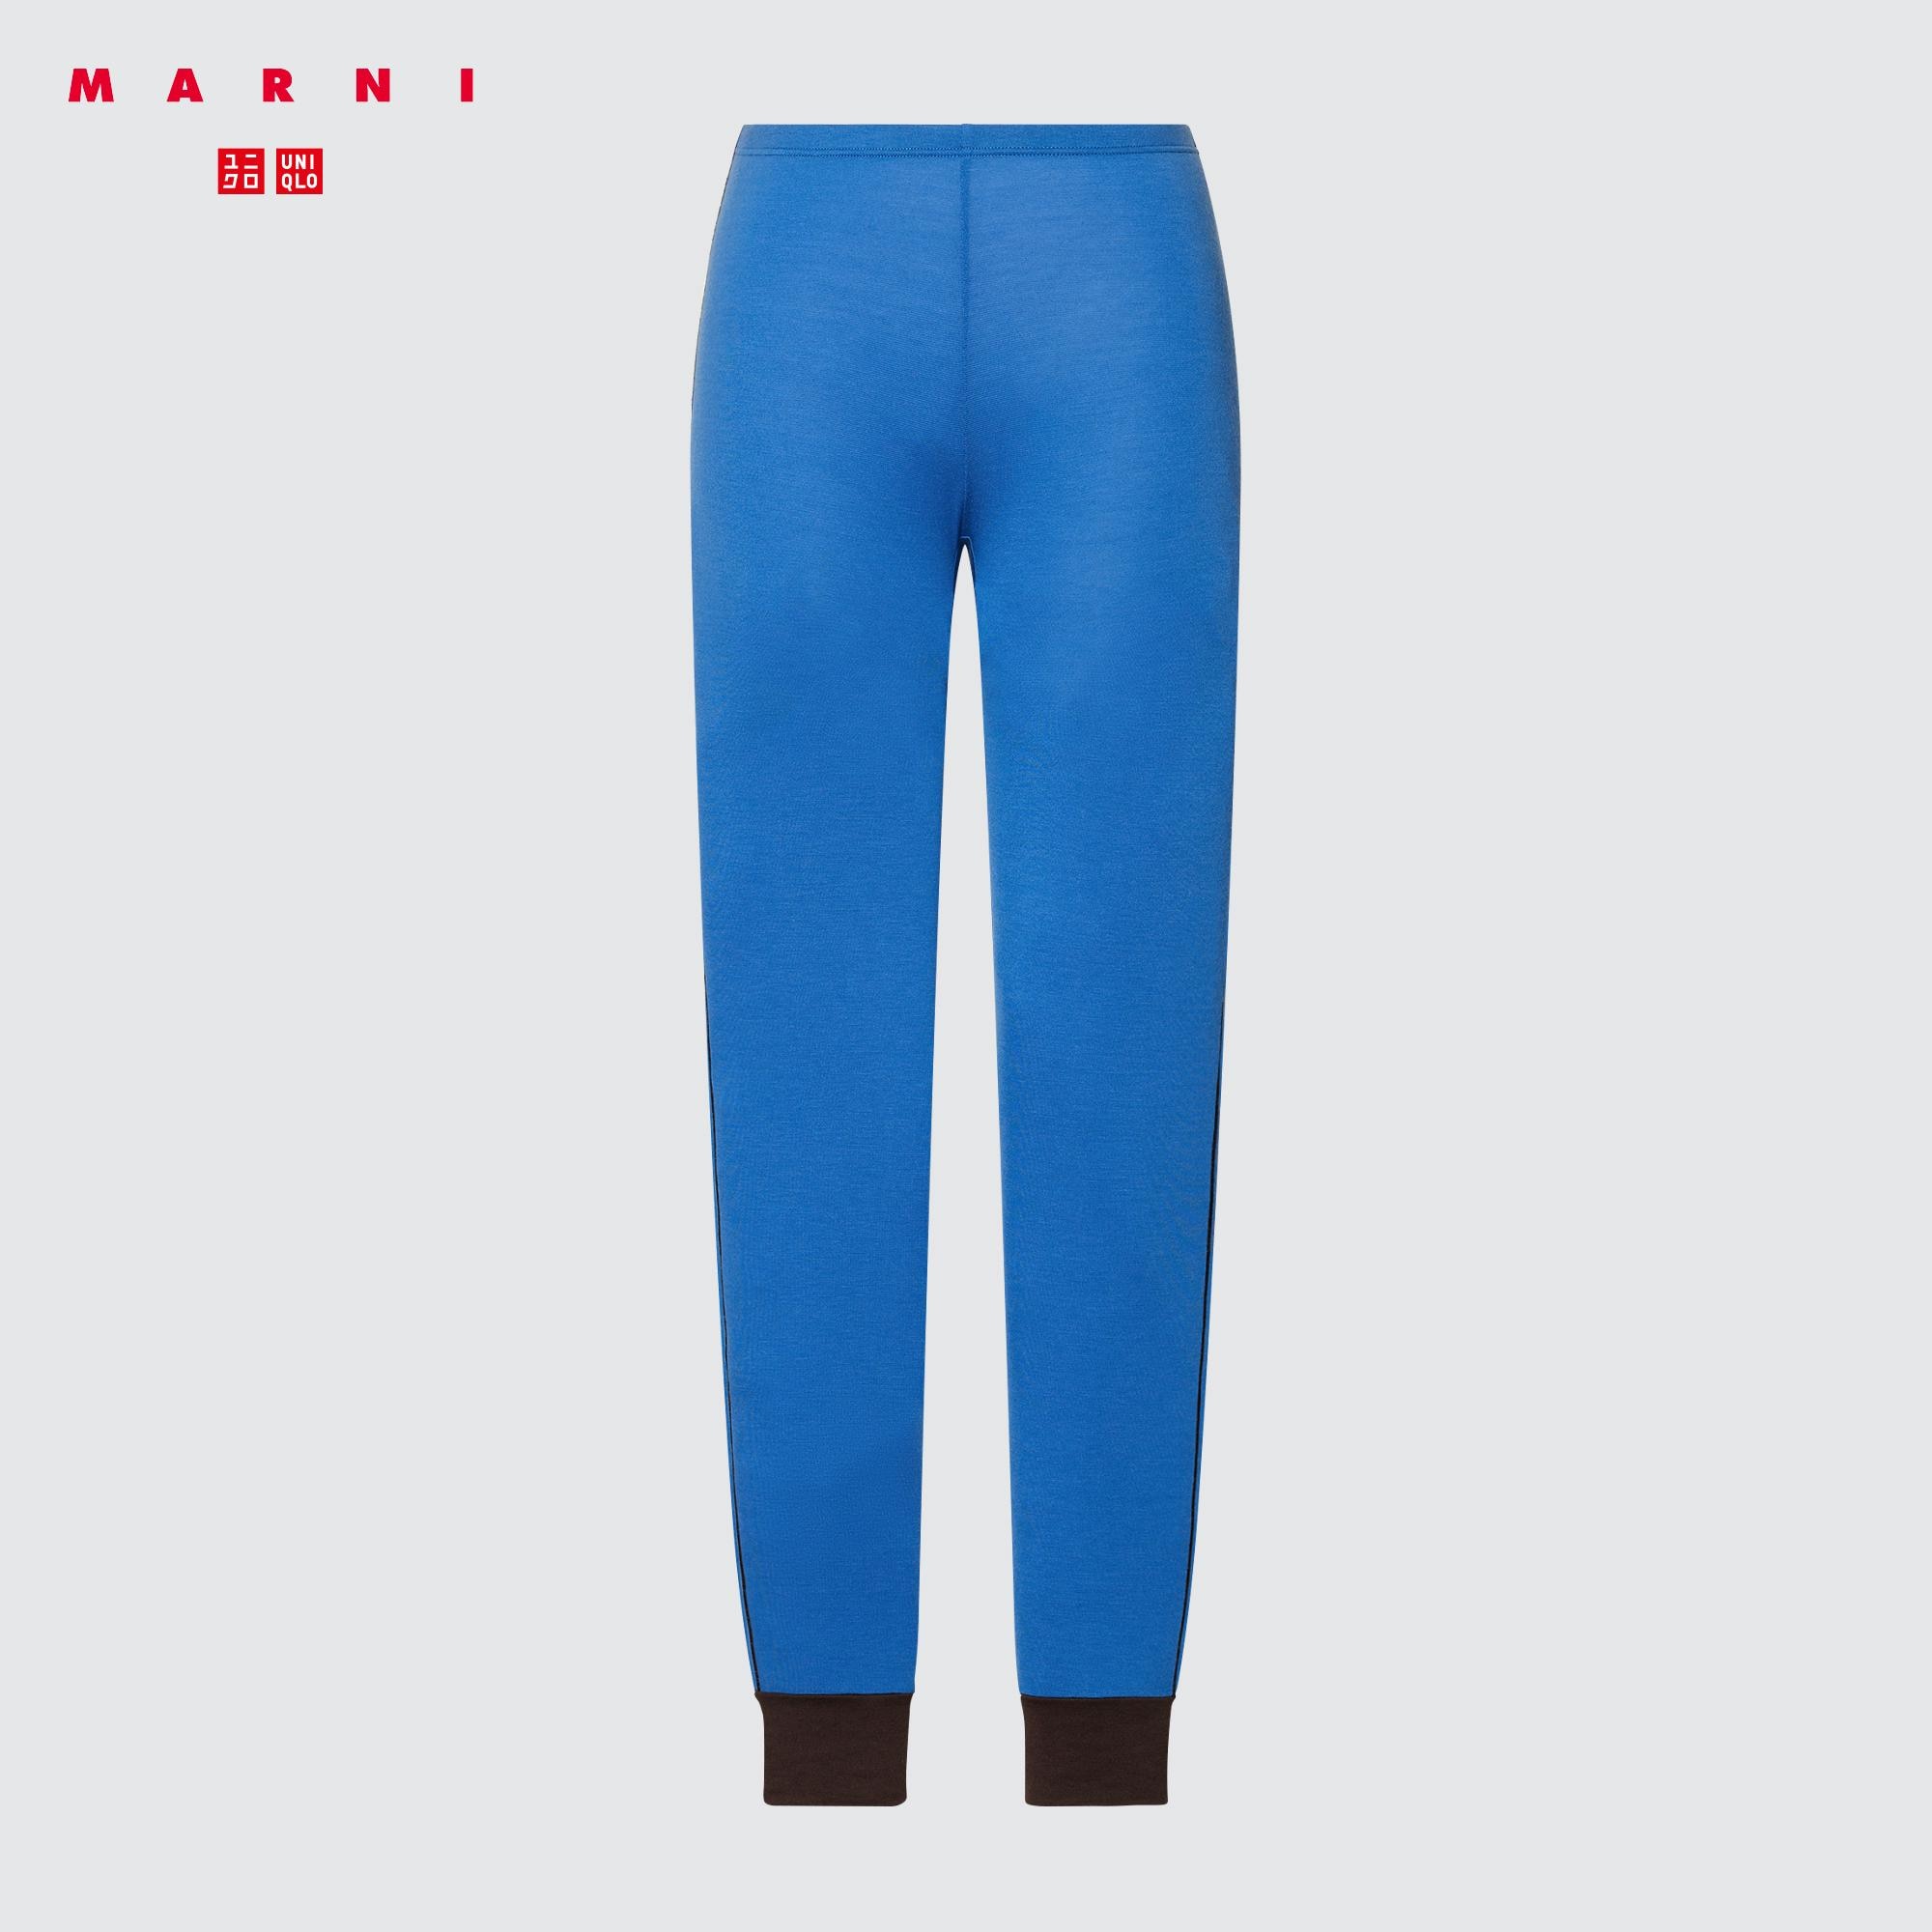 UNIQLO Women Heattech Leggings Authentic from Japan India